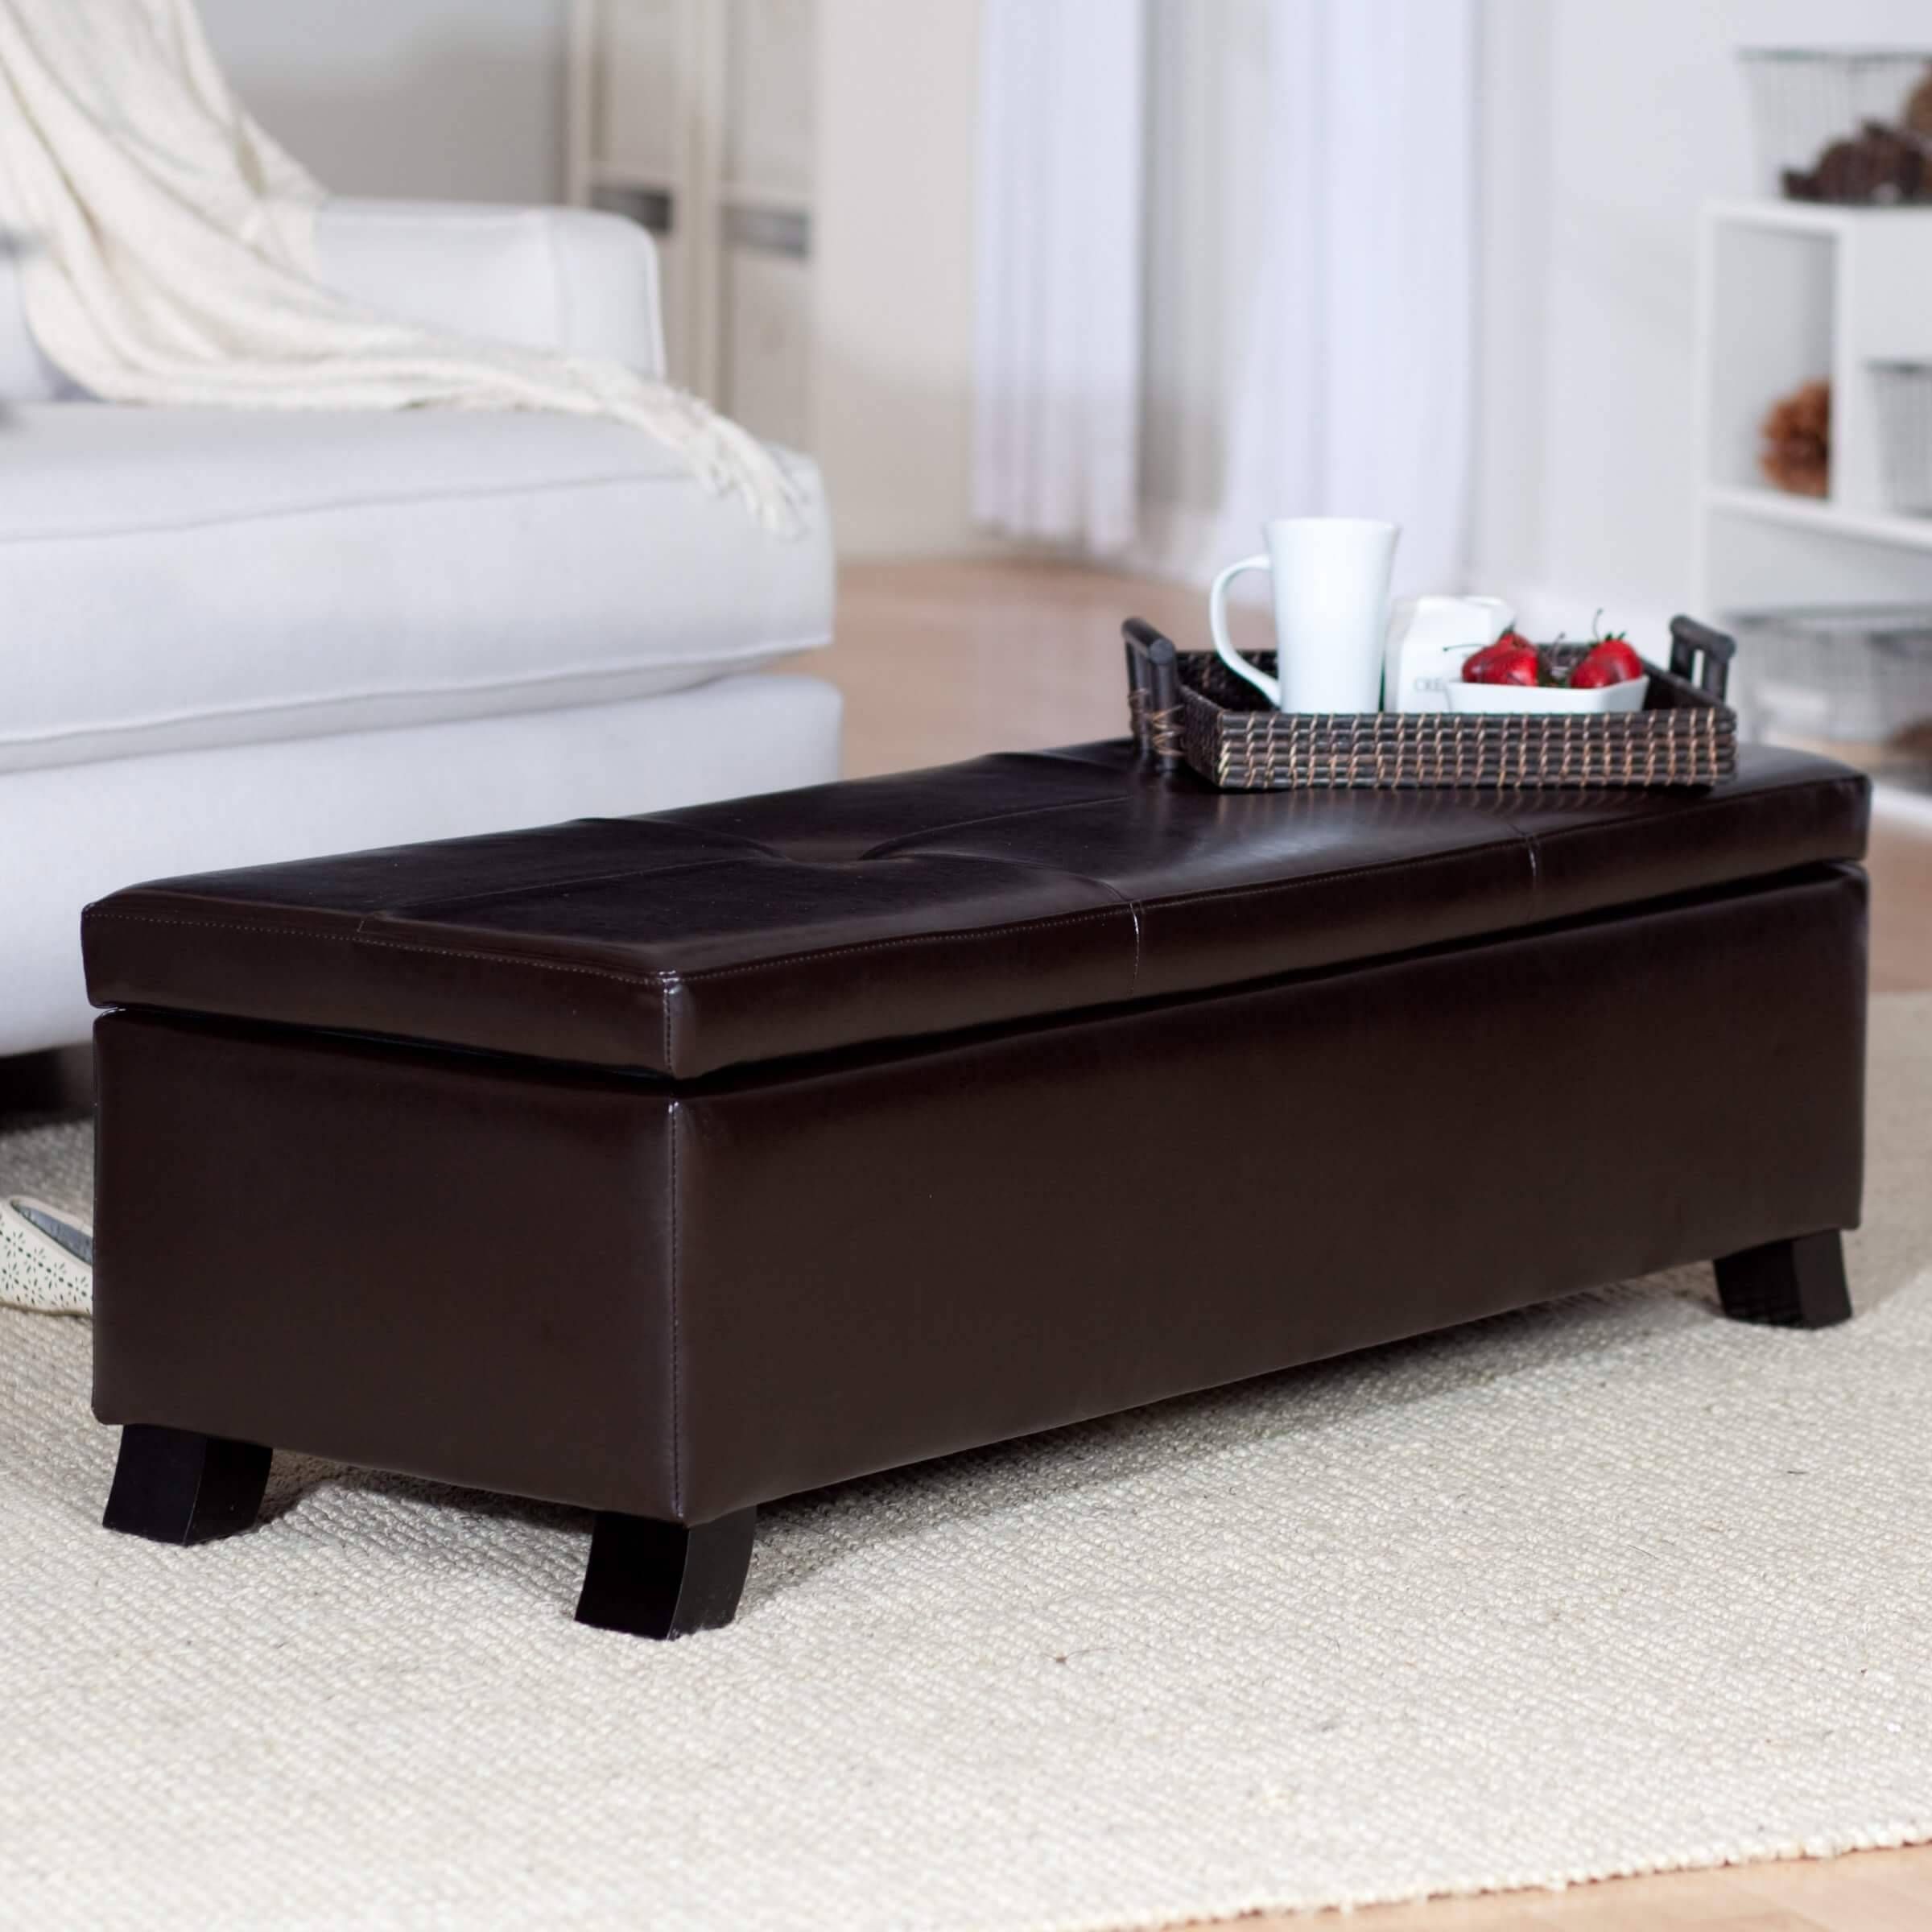 36 Top Brown Leather Ottoman Coffee Tables Intended For Brown Leather Ottoman Coffee Tables With Storages (View 2 of 30)